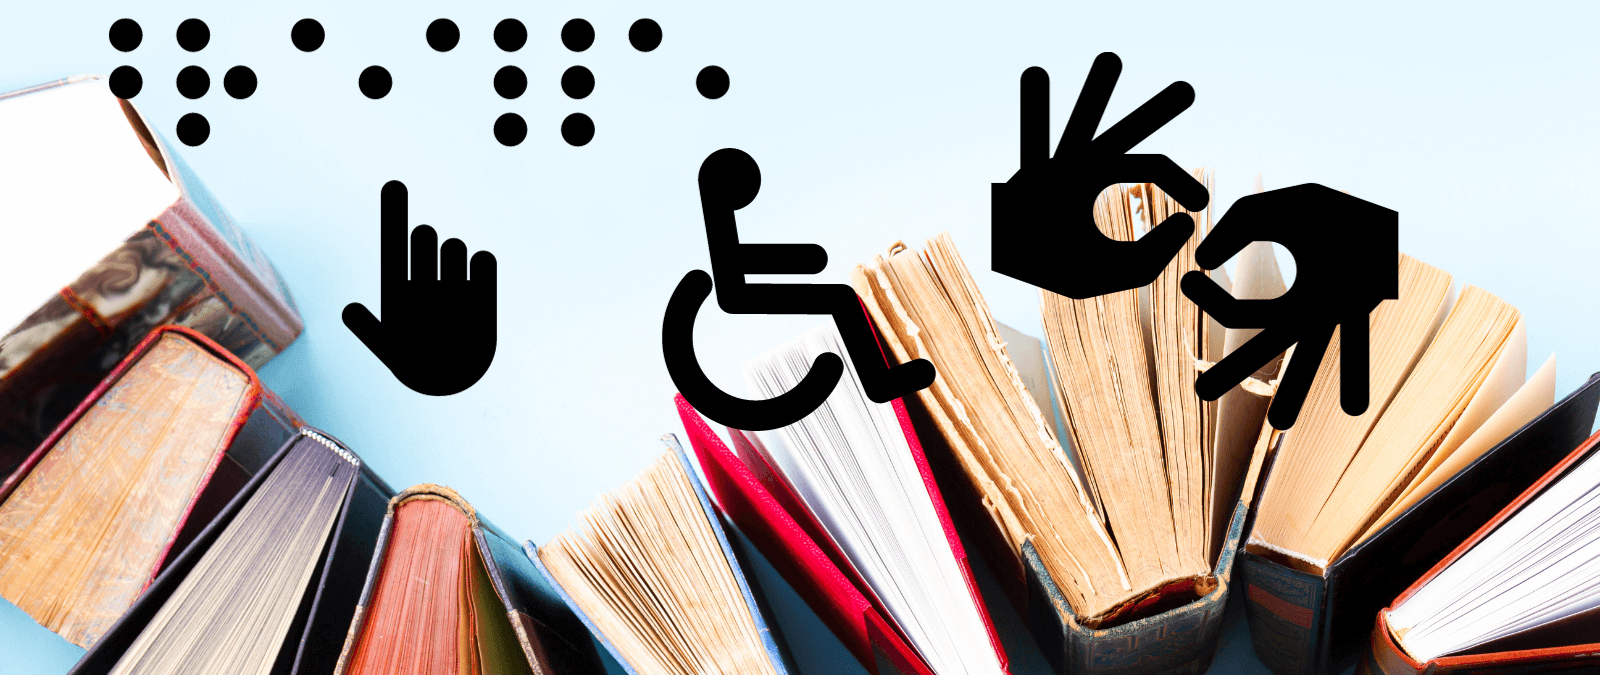 Technology, tools and resources to make literature accessible to people with disabilities · Maldita.es